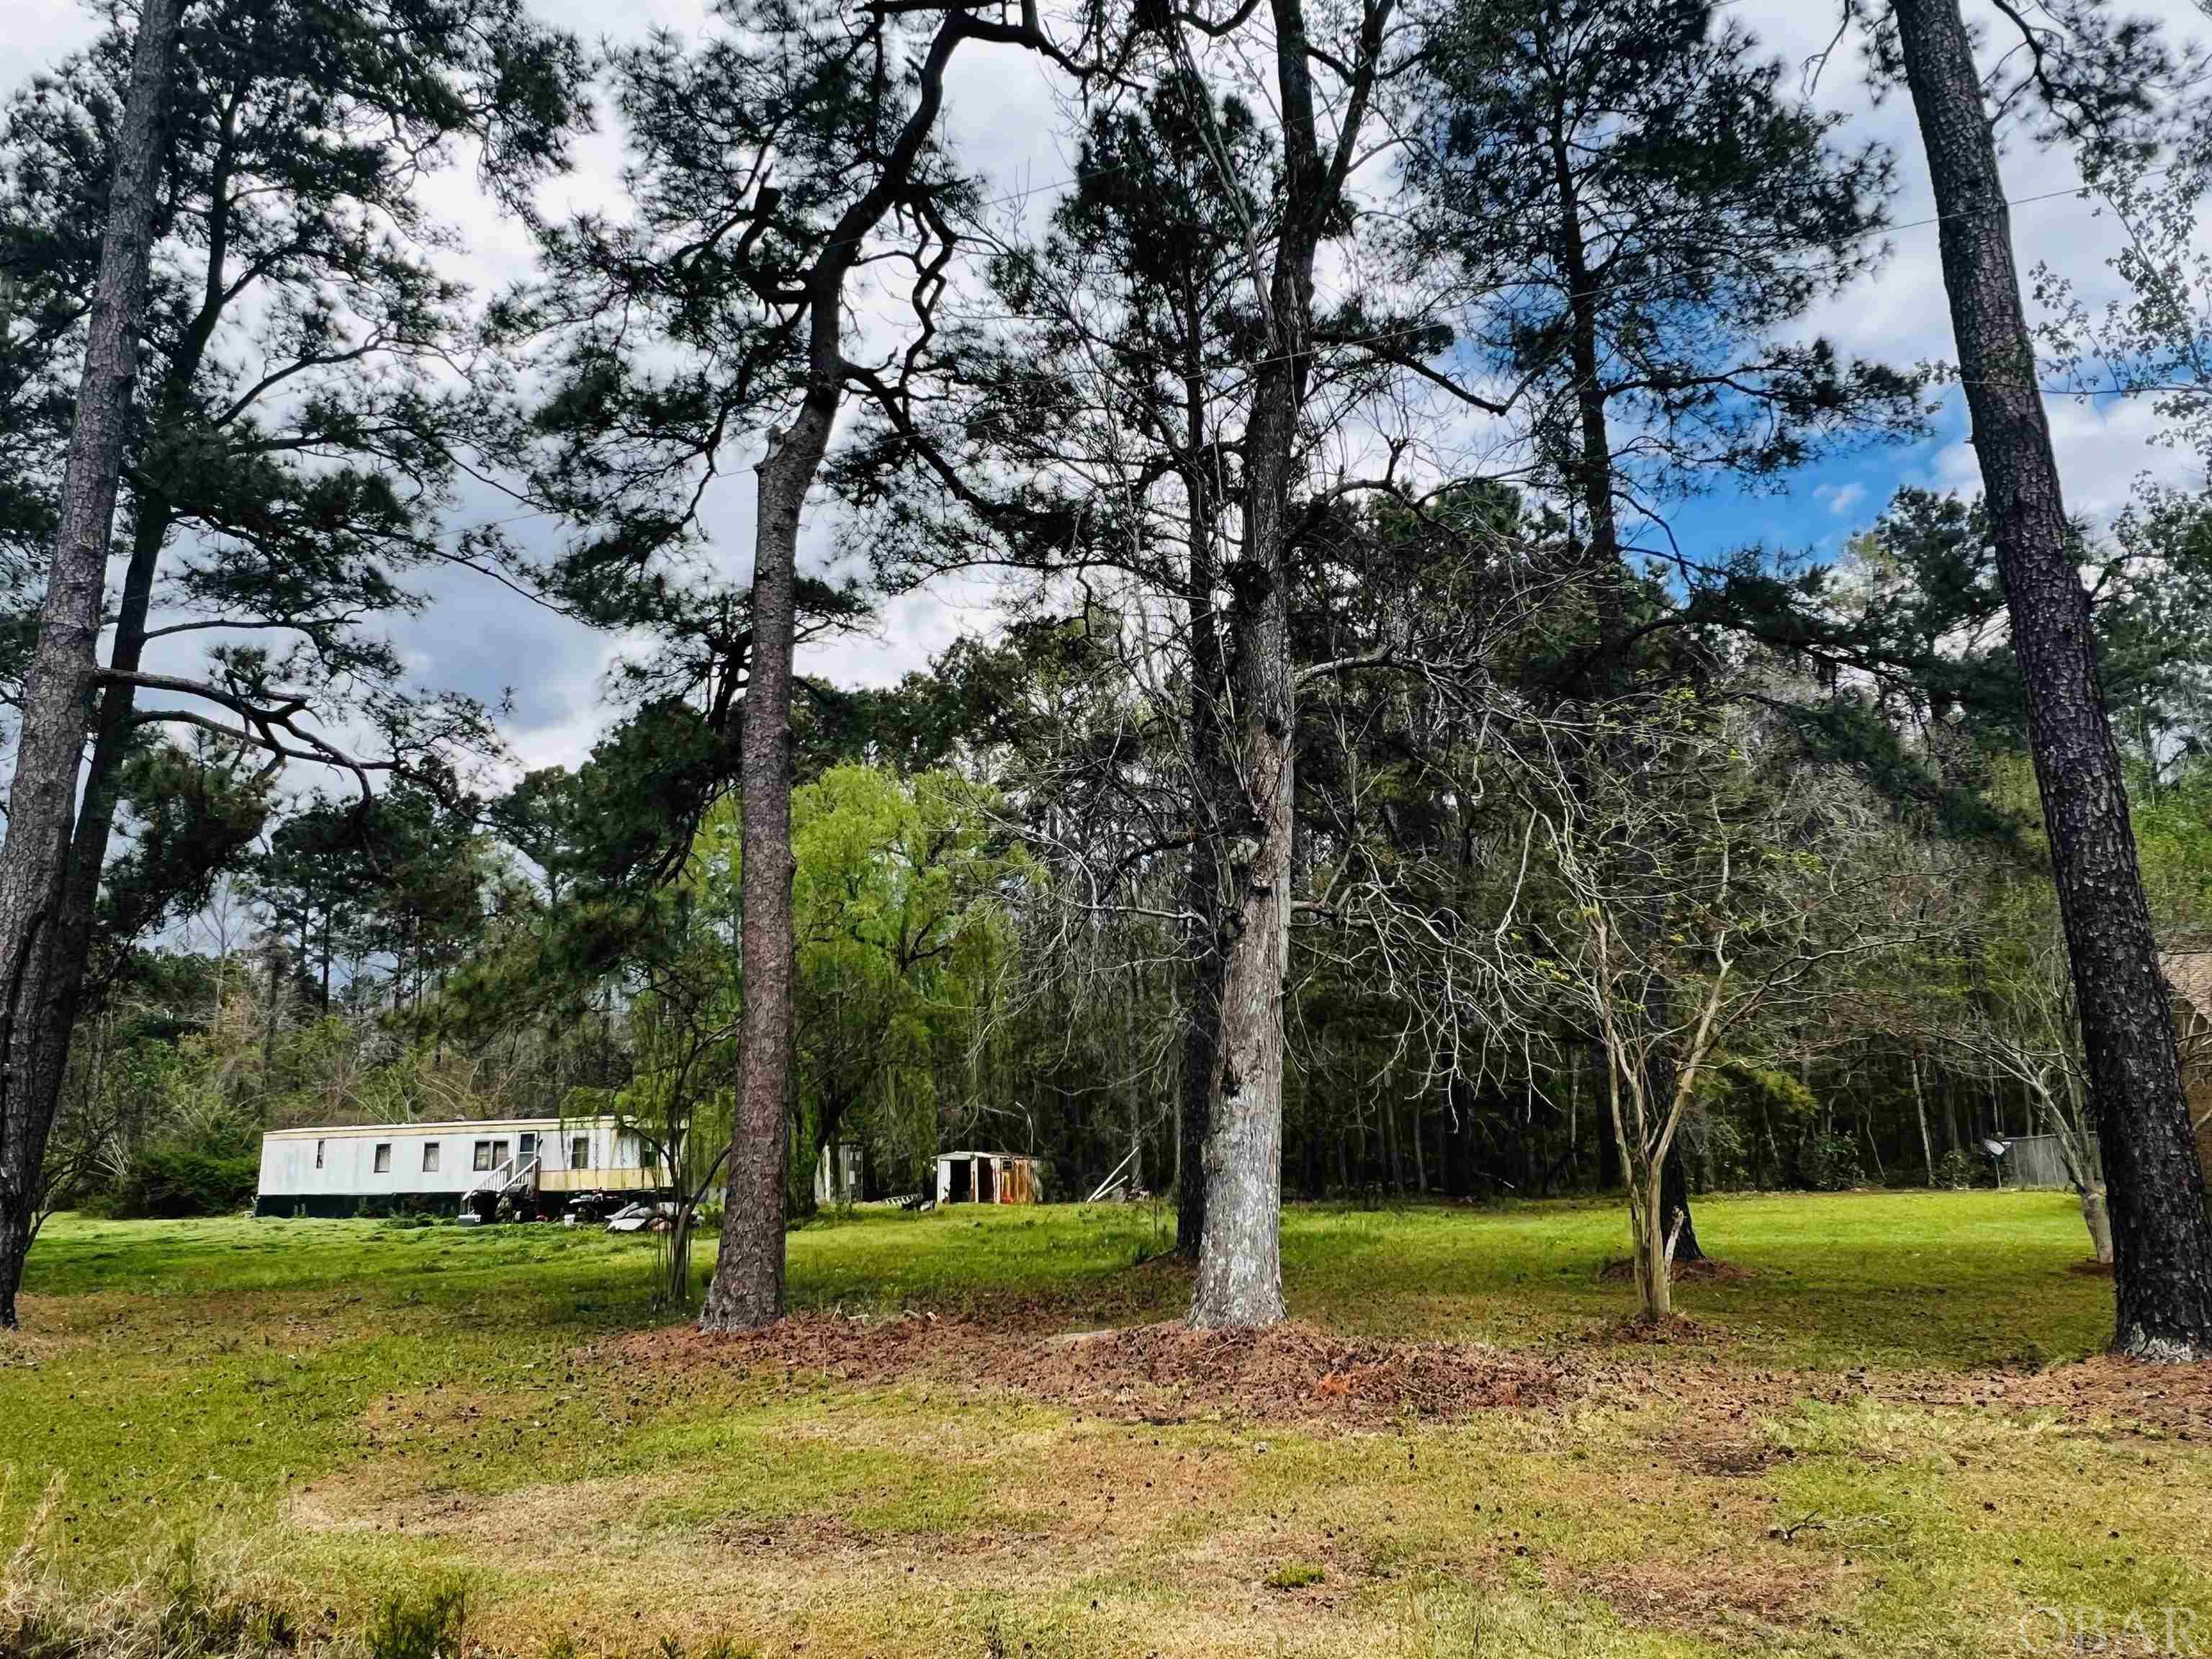 Great possibilities with 9.6 acres of land just waiting to be developed. Two miles from the Intercoastal Water Way, with several boat launching areas, into the Alligator River for the Fishing Angler. Just a short drive (20 minuets) to the Ocean and all it's amenities!